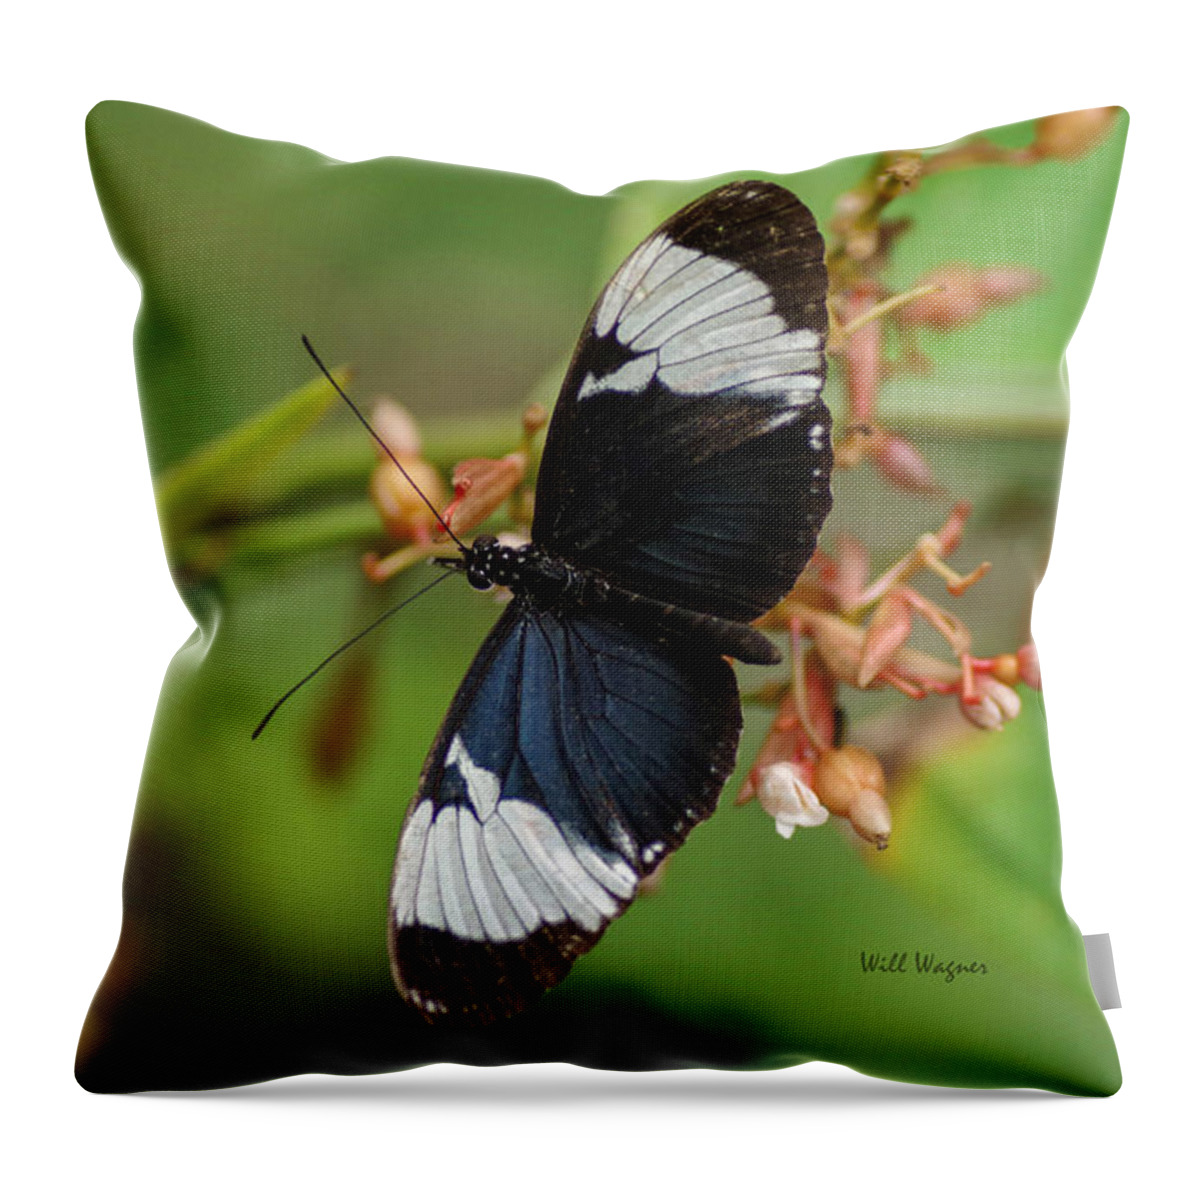 Butterfly Throw Pillow featuring the photograph Butterfly 06 by Will Wagner